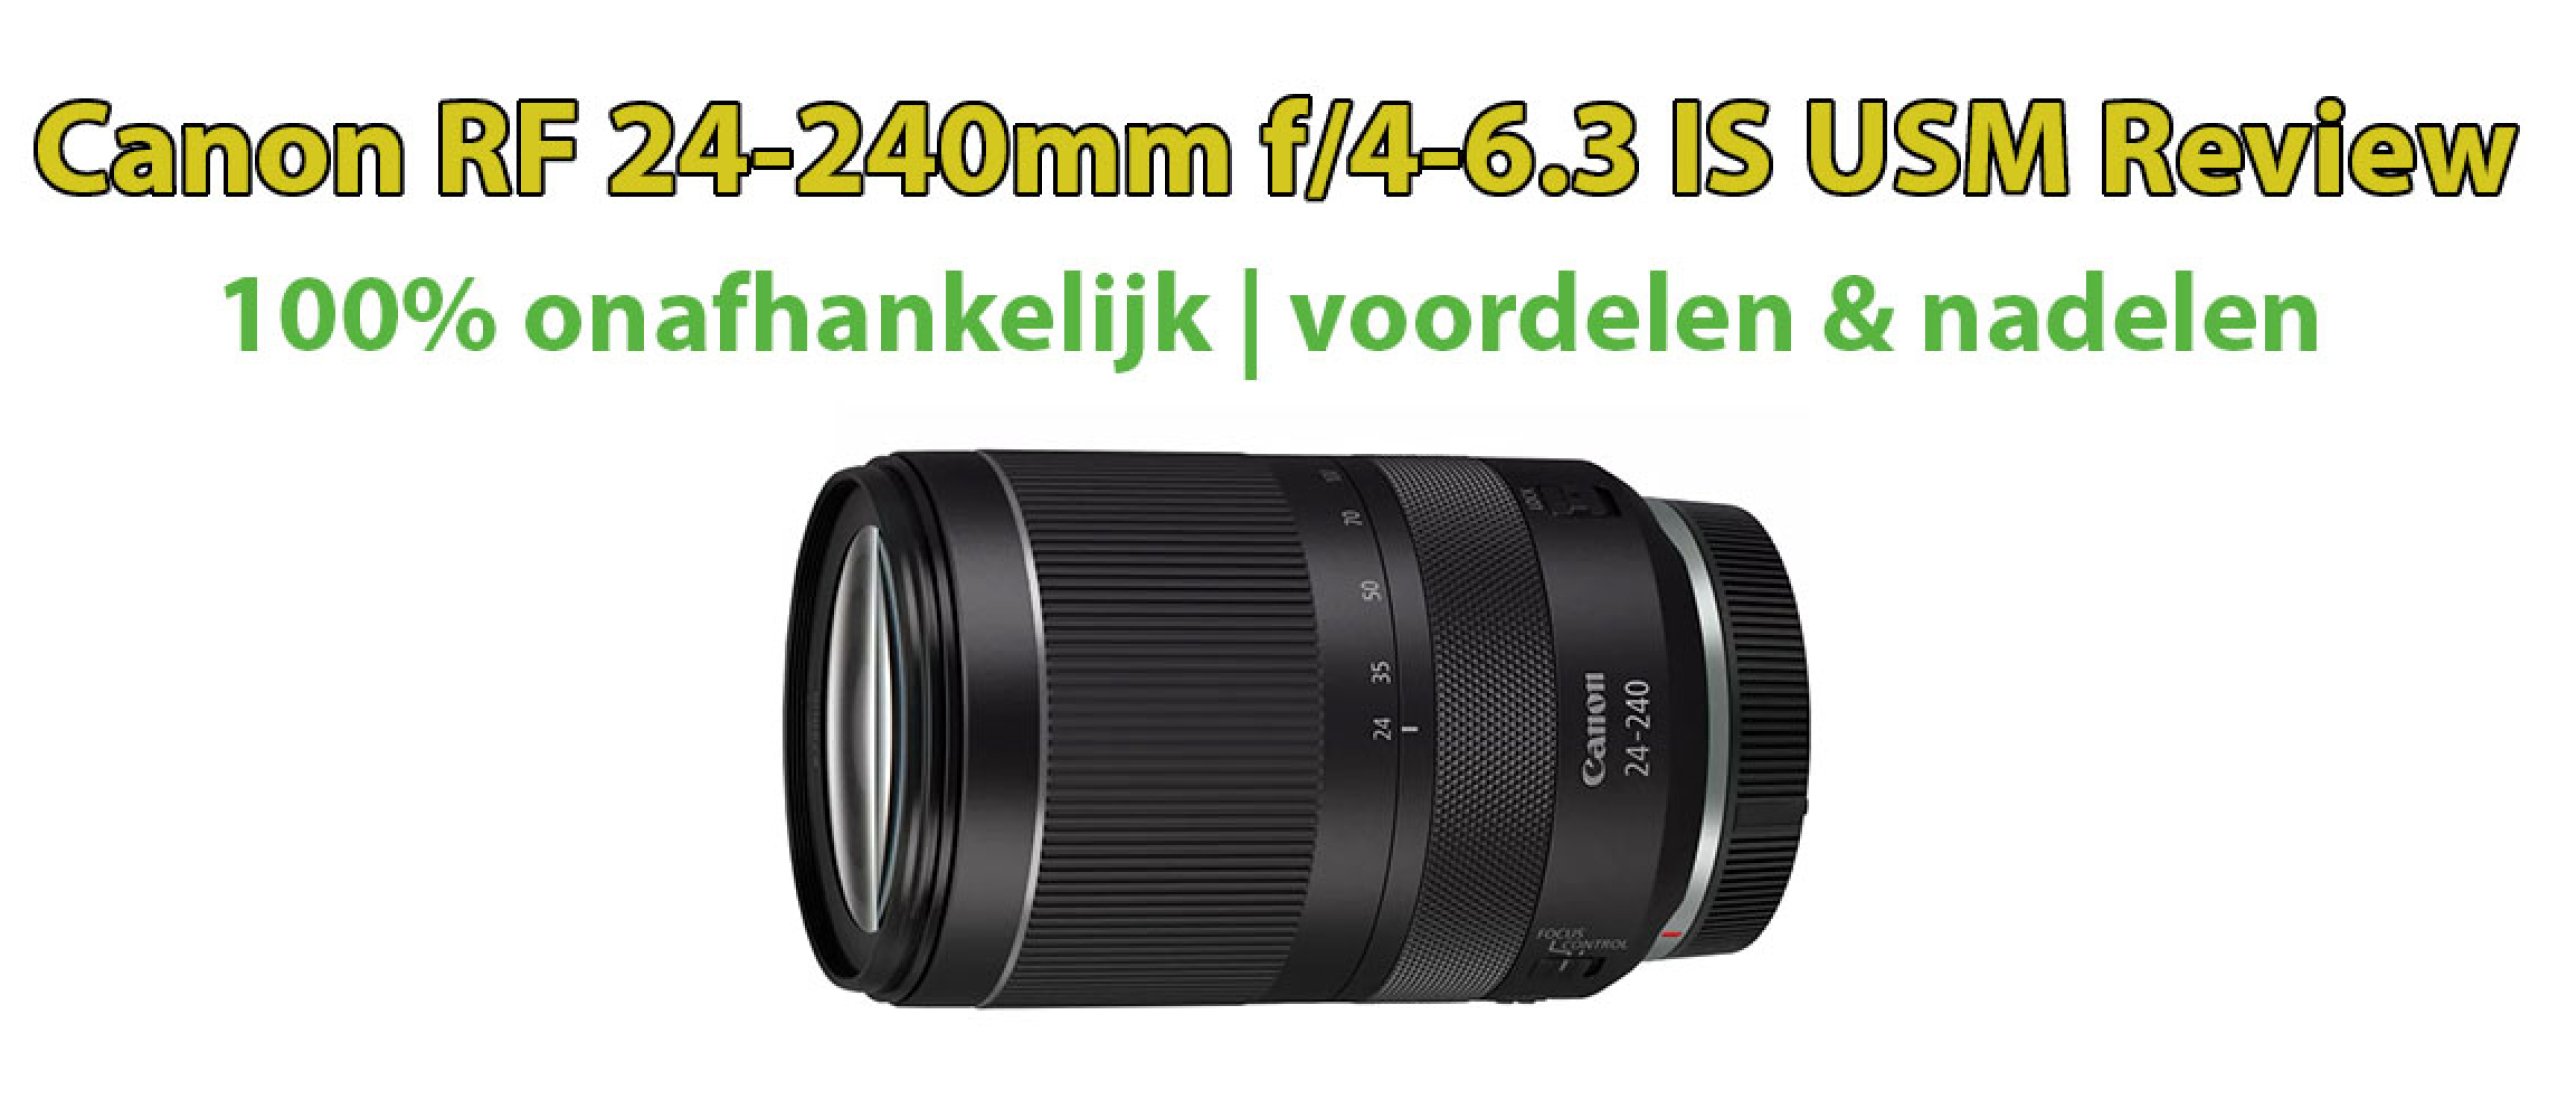 Canon RF 24-240mm f/4-6.3 IS USM Review